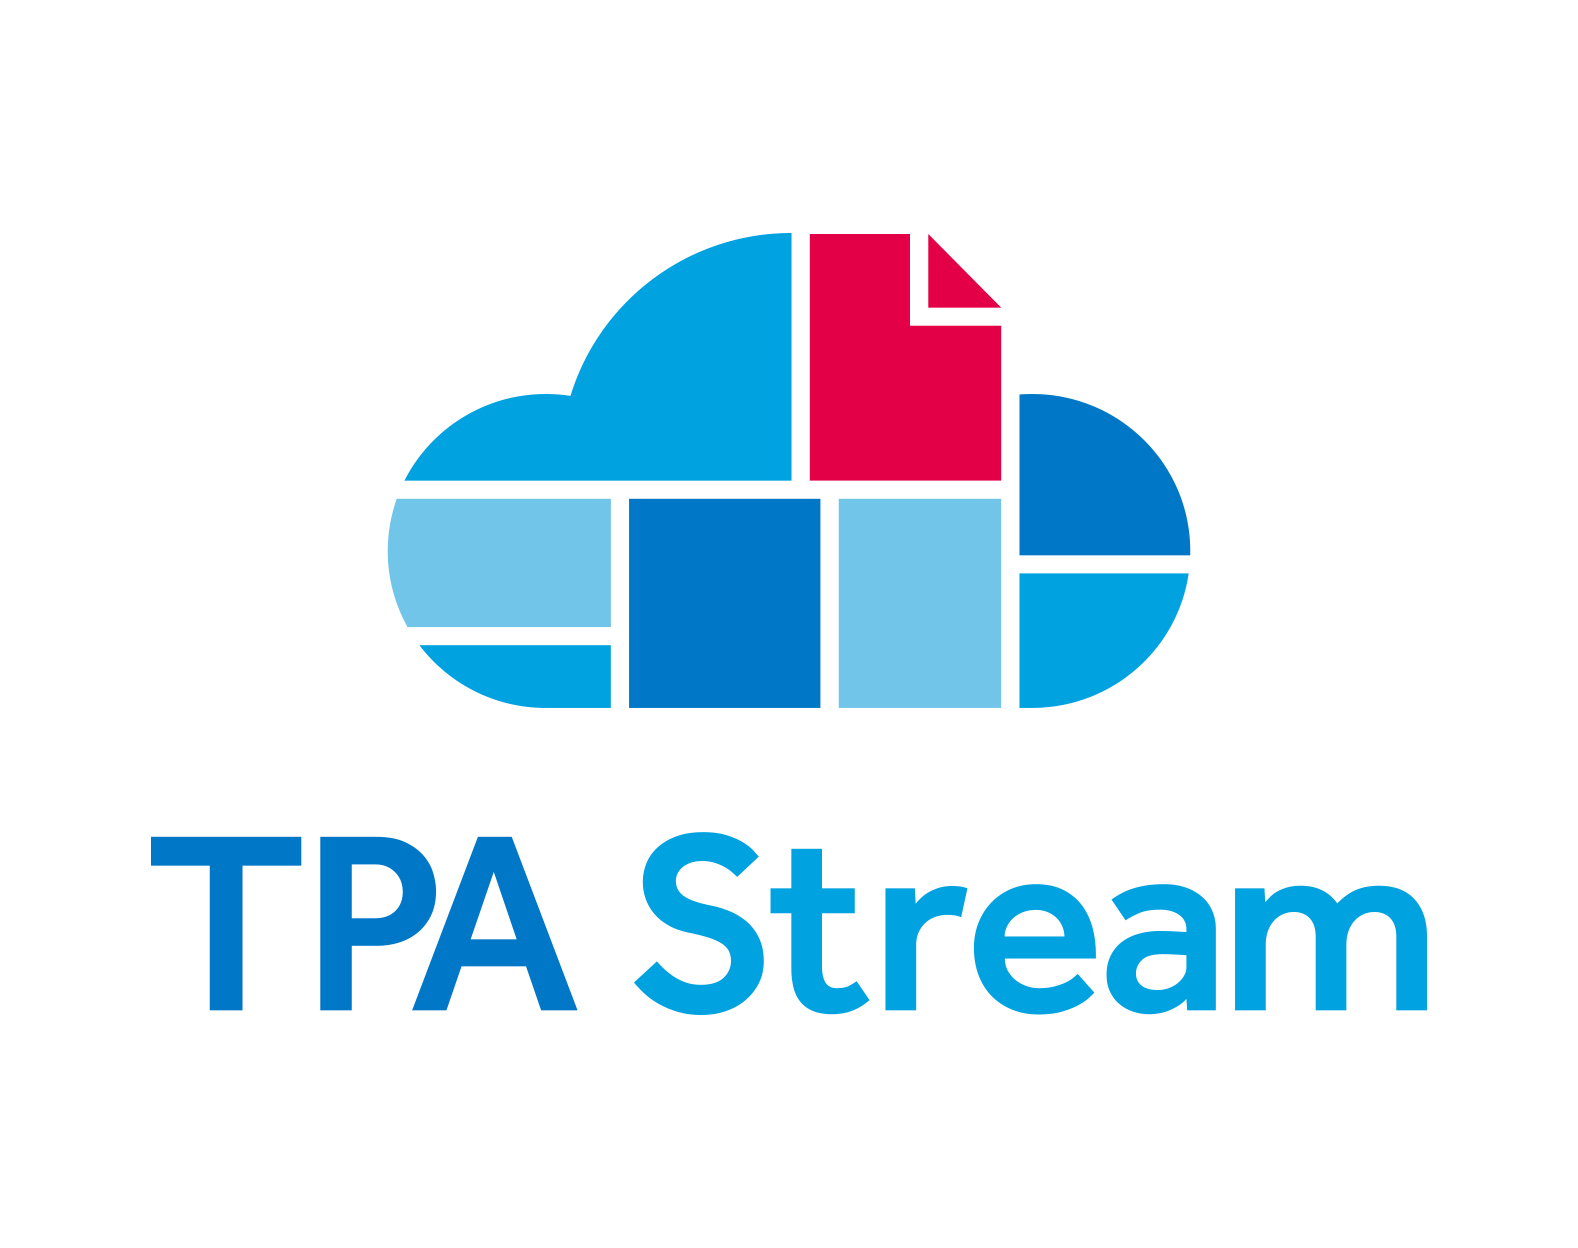 TPA Stream - Claims data and software for next generation benefits